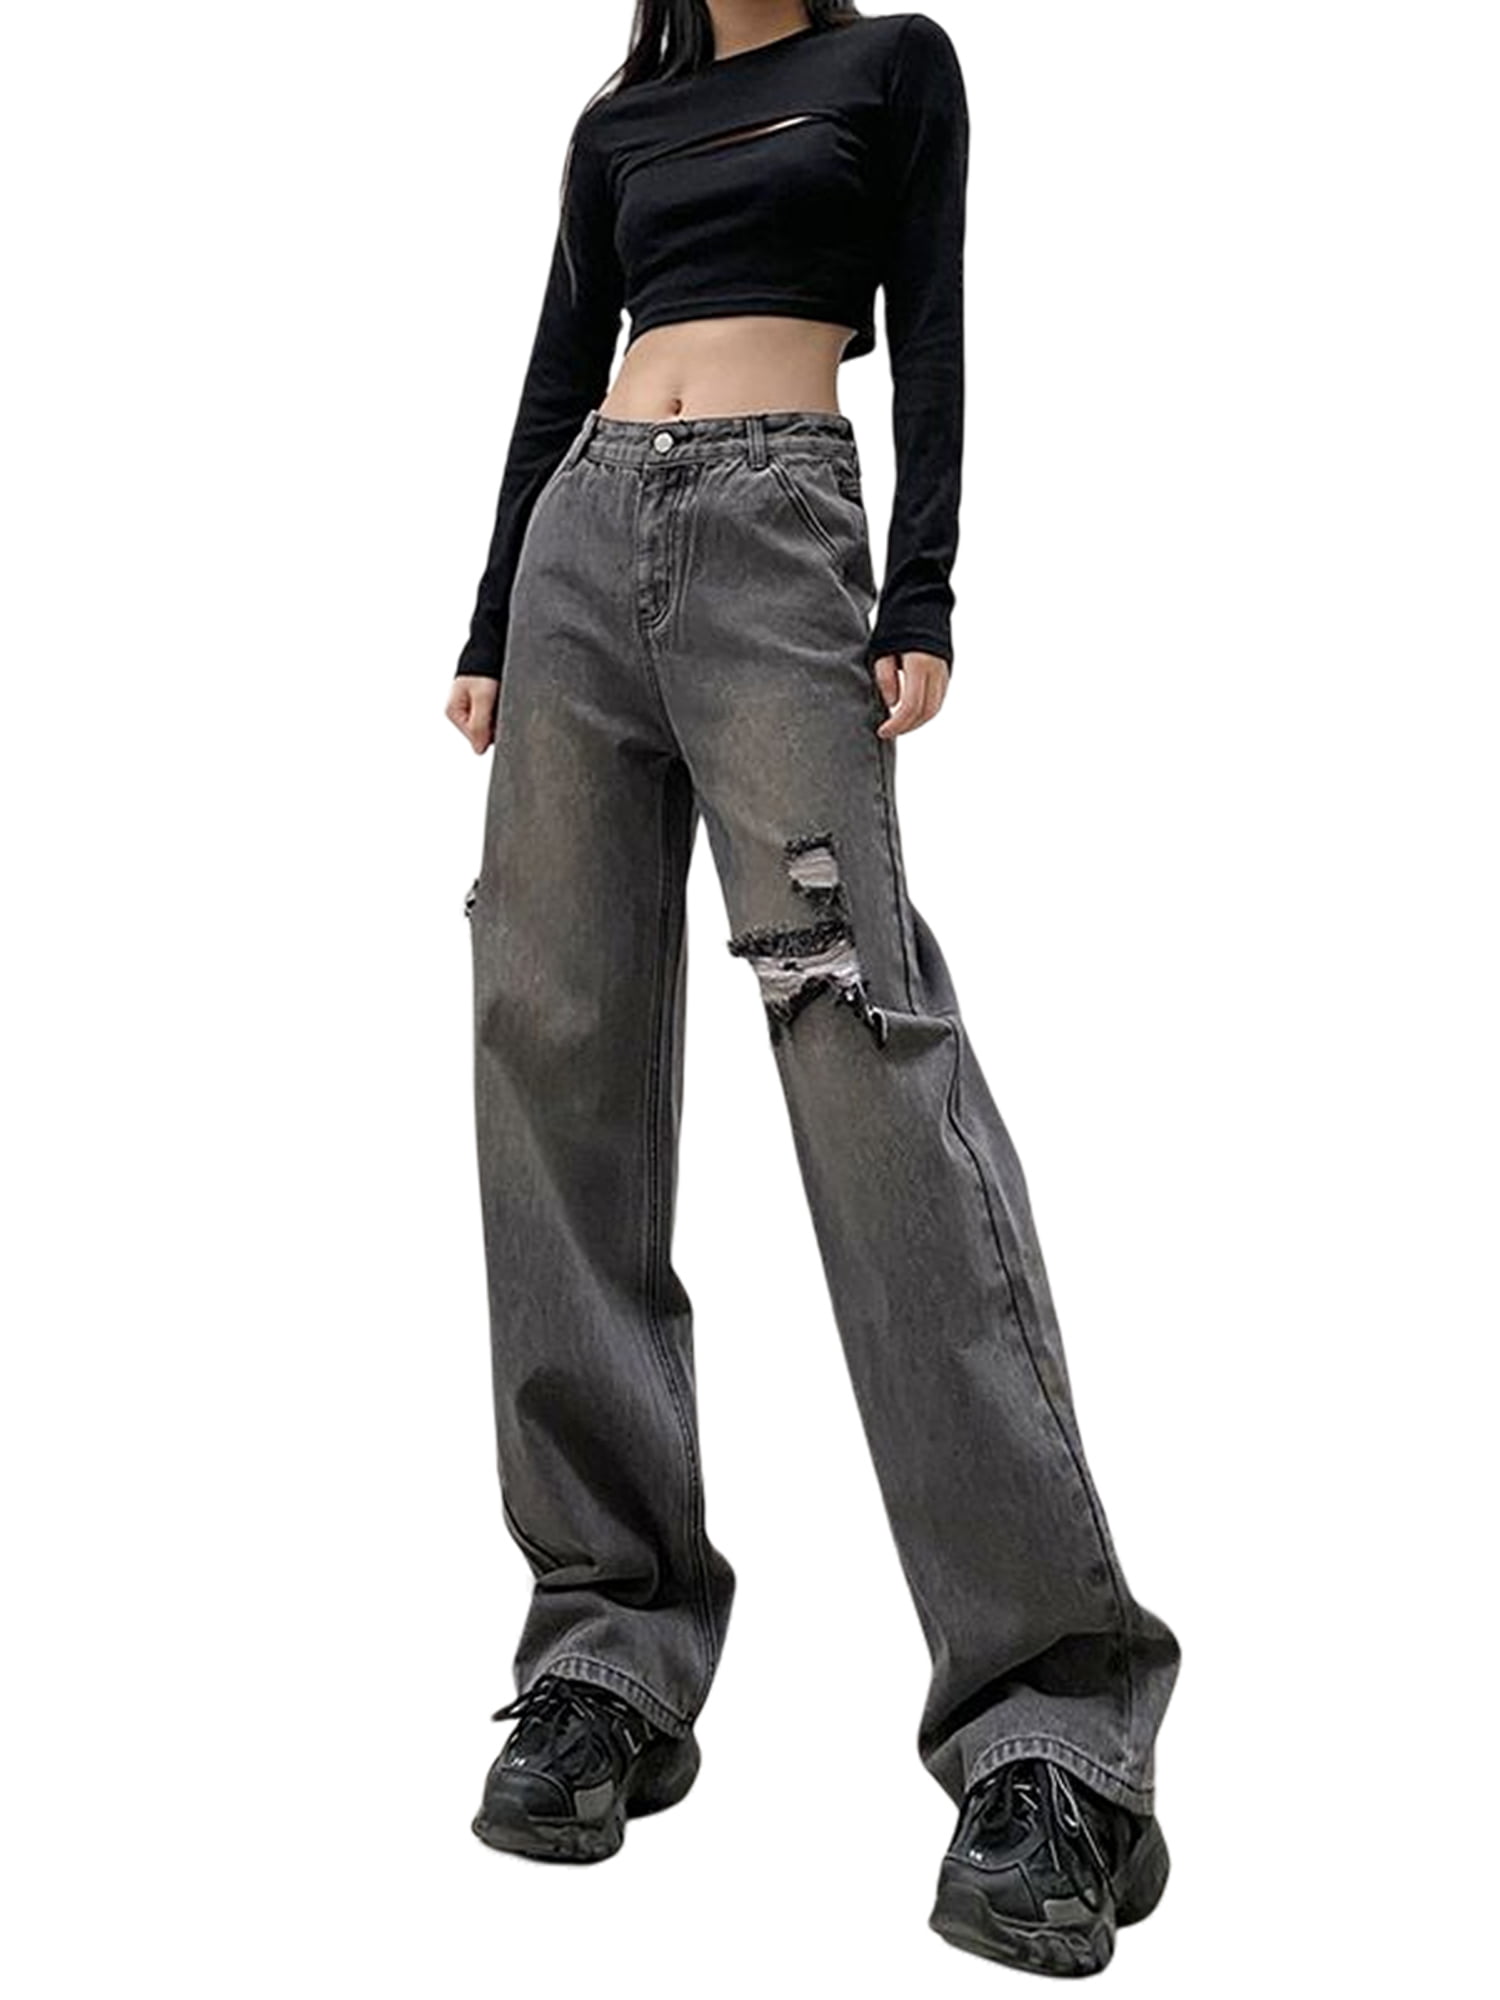 Yinyinxull Women Y2K Baggy Hole Ripped Jeans Korean Style High